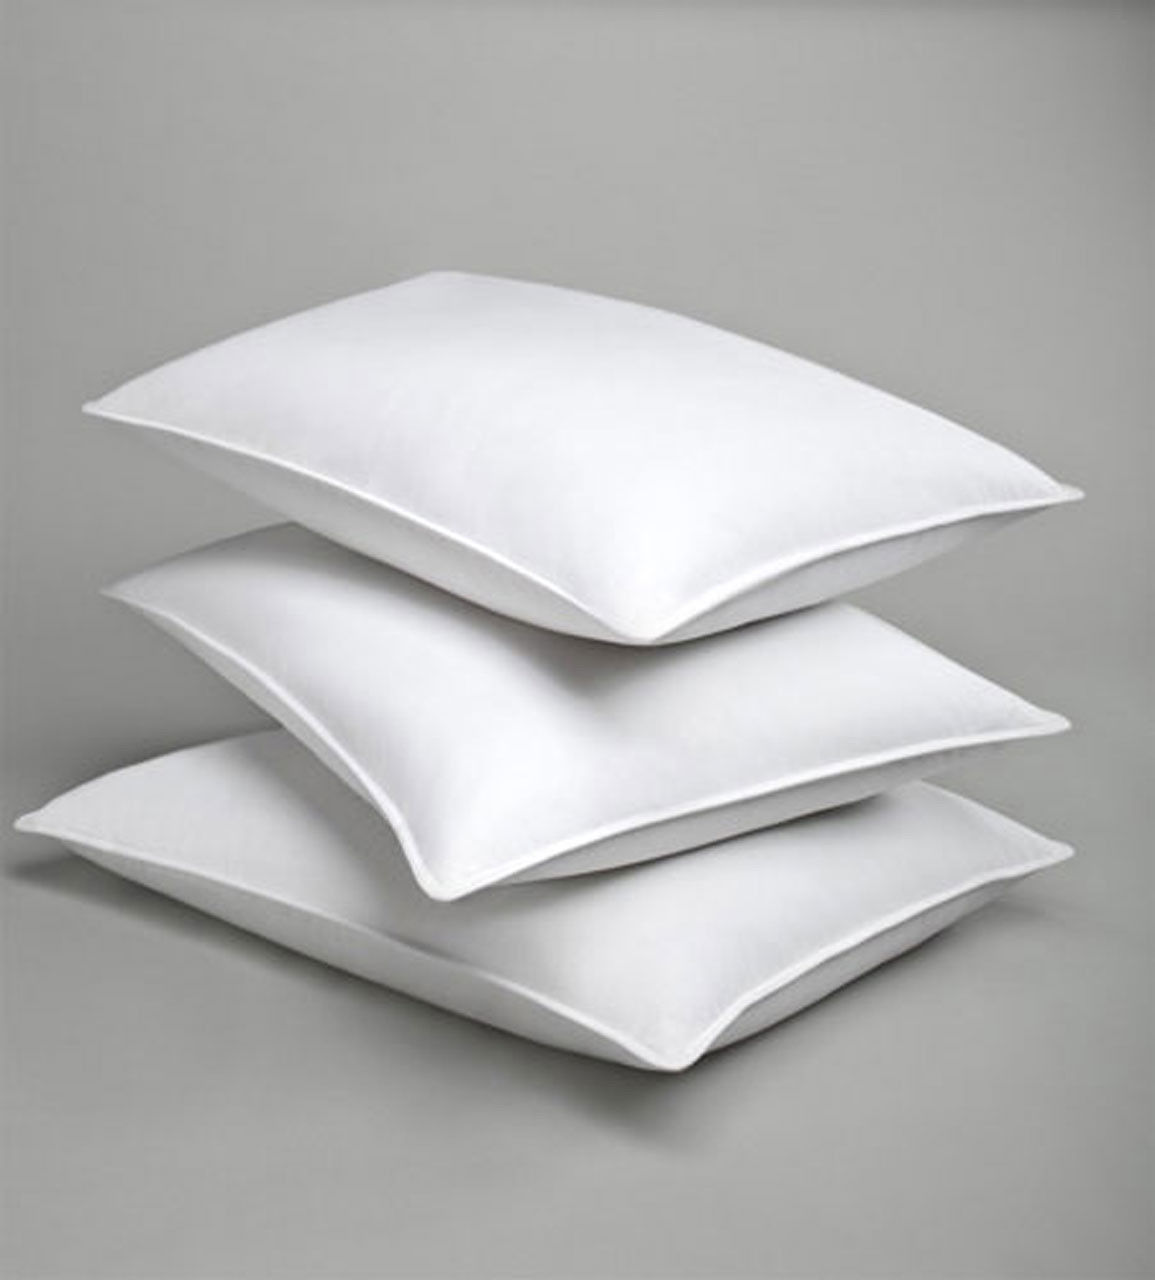 What makes the ChamberLoft pillow a cost-effective and enduringly comfortable choice?